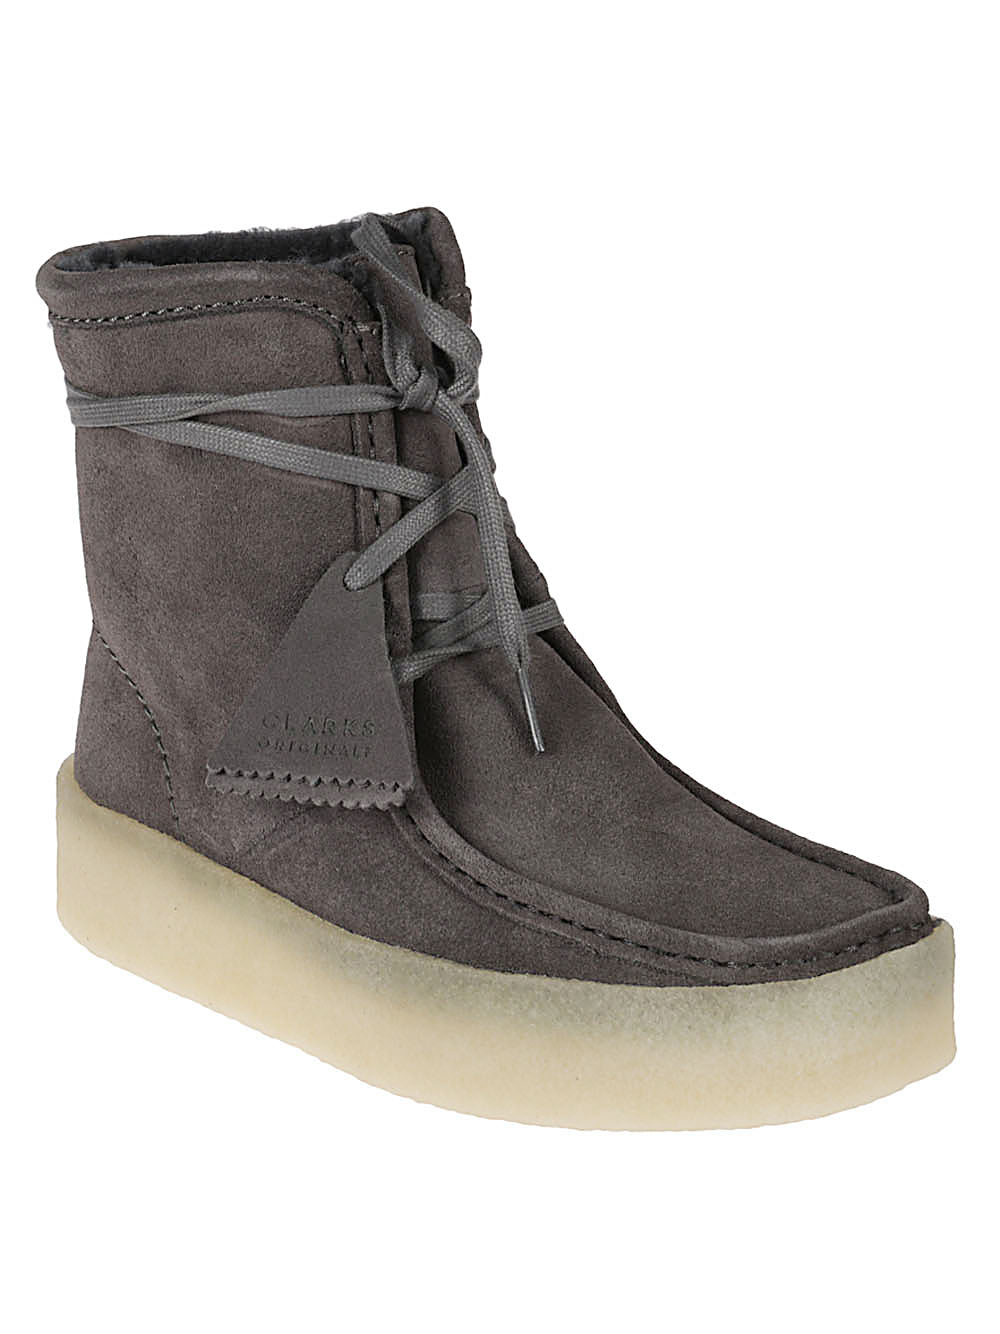 Clarks Boots Grey